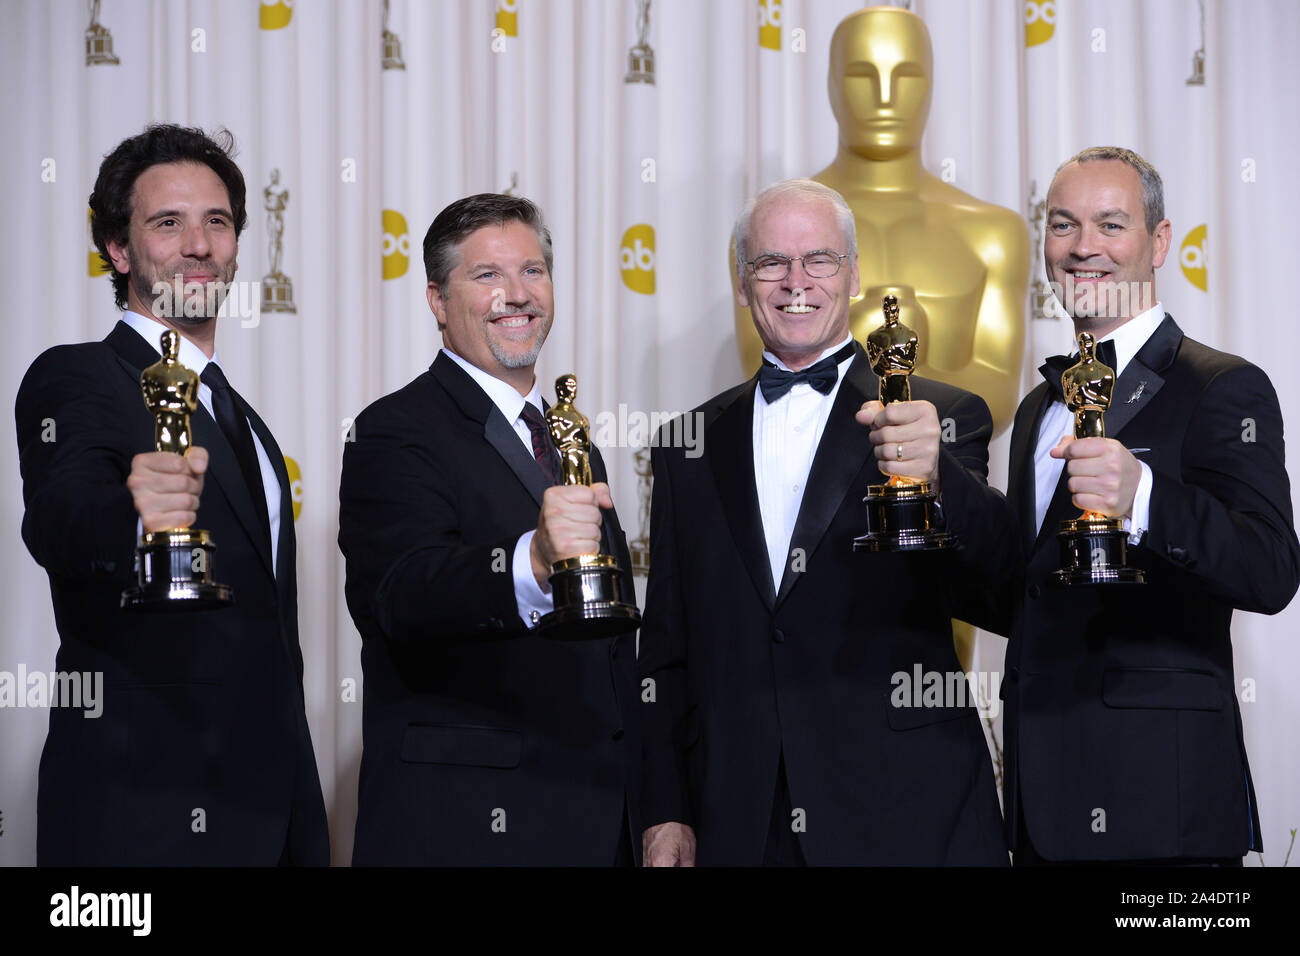 Photo Must Be Credited ©Karwai Tang/Alpha Press 076909 24/02/2013 Guillaume Rocheron, Bill Westenhofer, Donald R Elliott and Erik Jan de Boer win Best Visual Effects for Life of Pi at The 85th Academy Awards Oscars 2013 Pressroom held at The Dolby Theatre Hollywood Blvd Los Angeles California Stock Photo